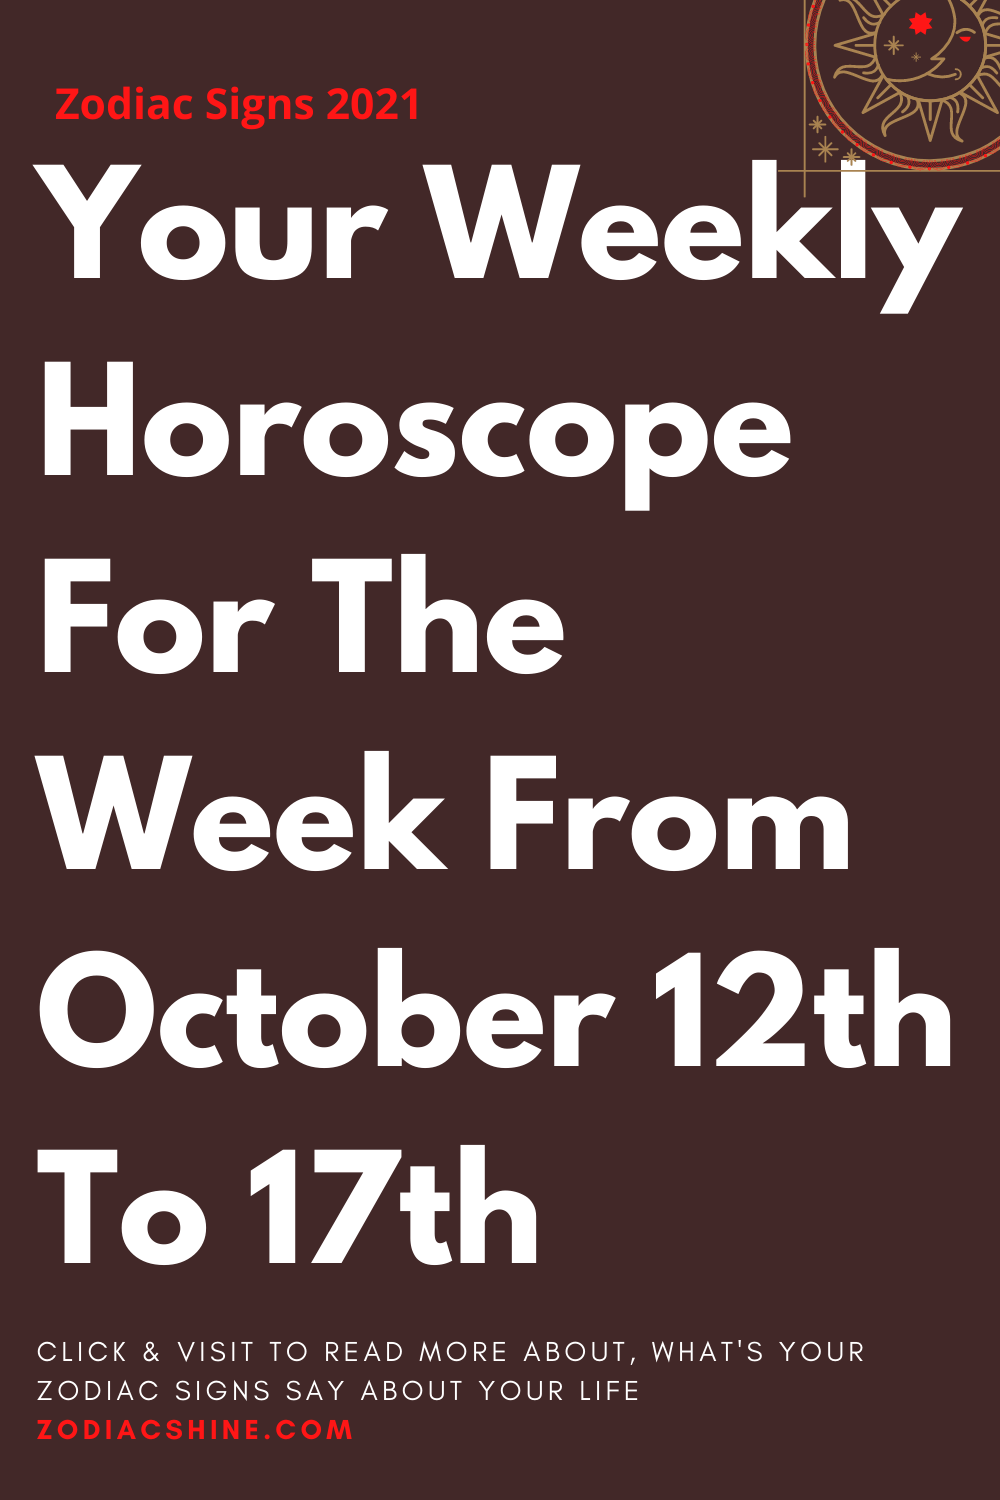 Your Weekly Horoscope For The Week From October 12th To 17th